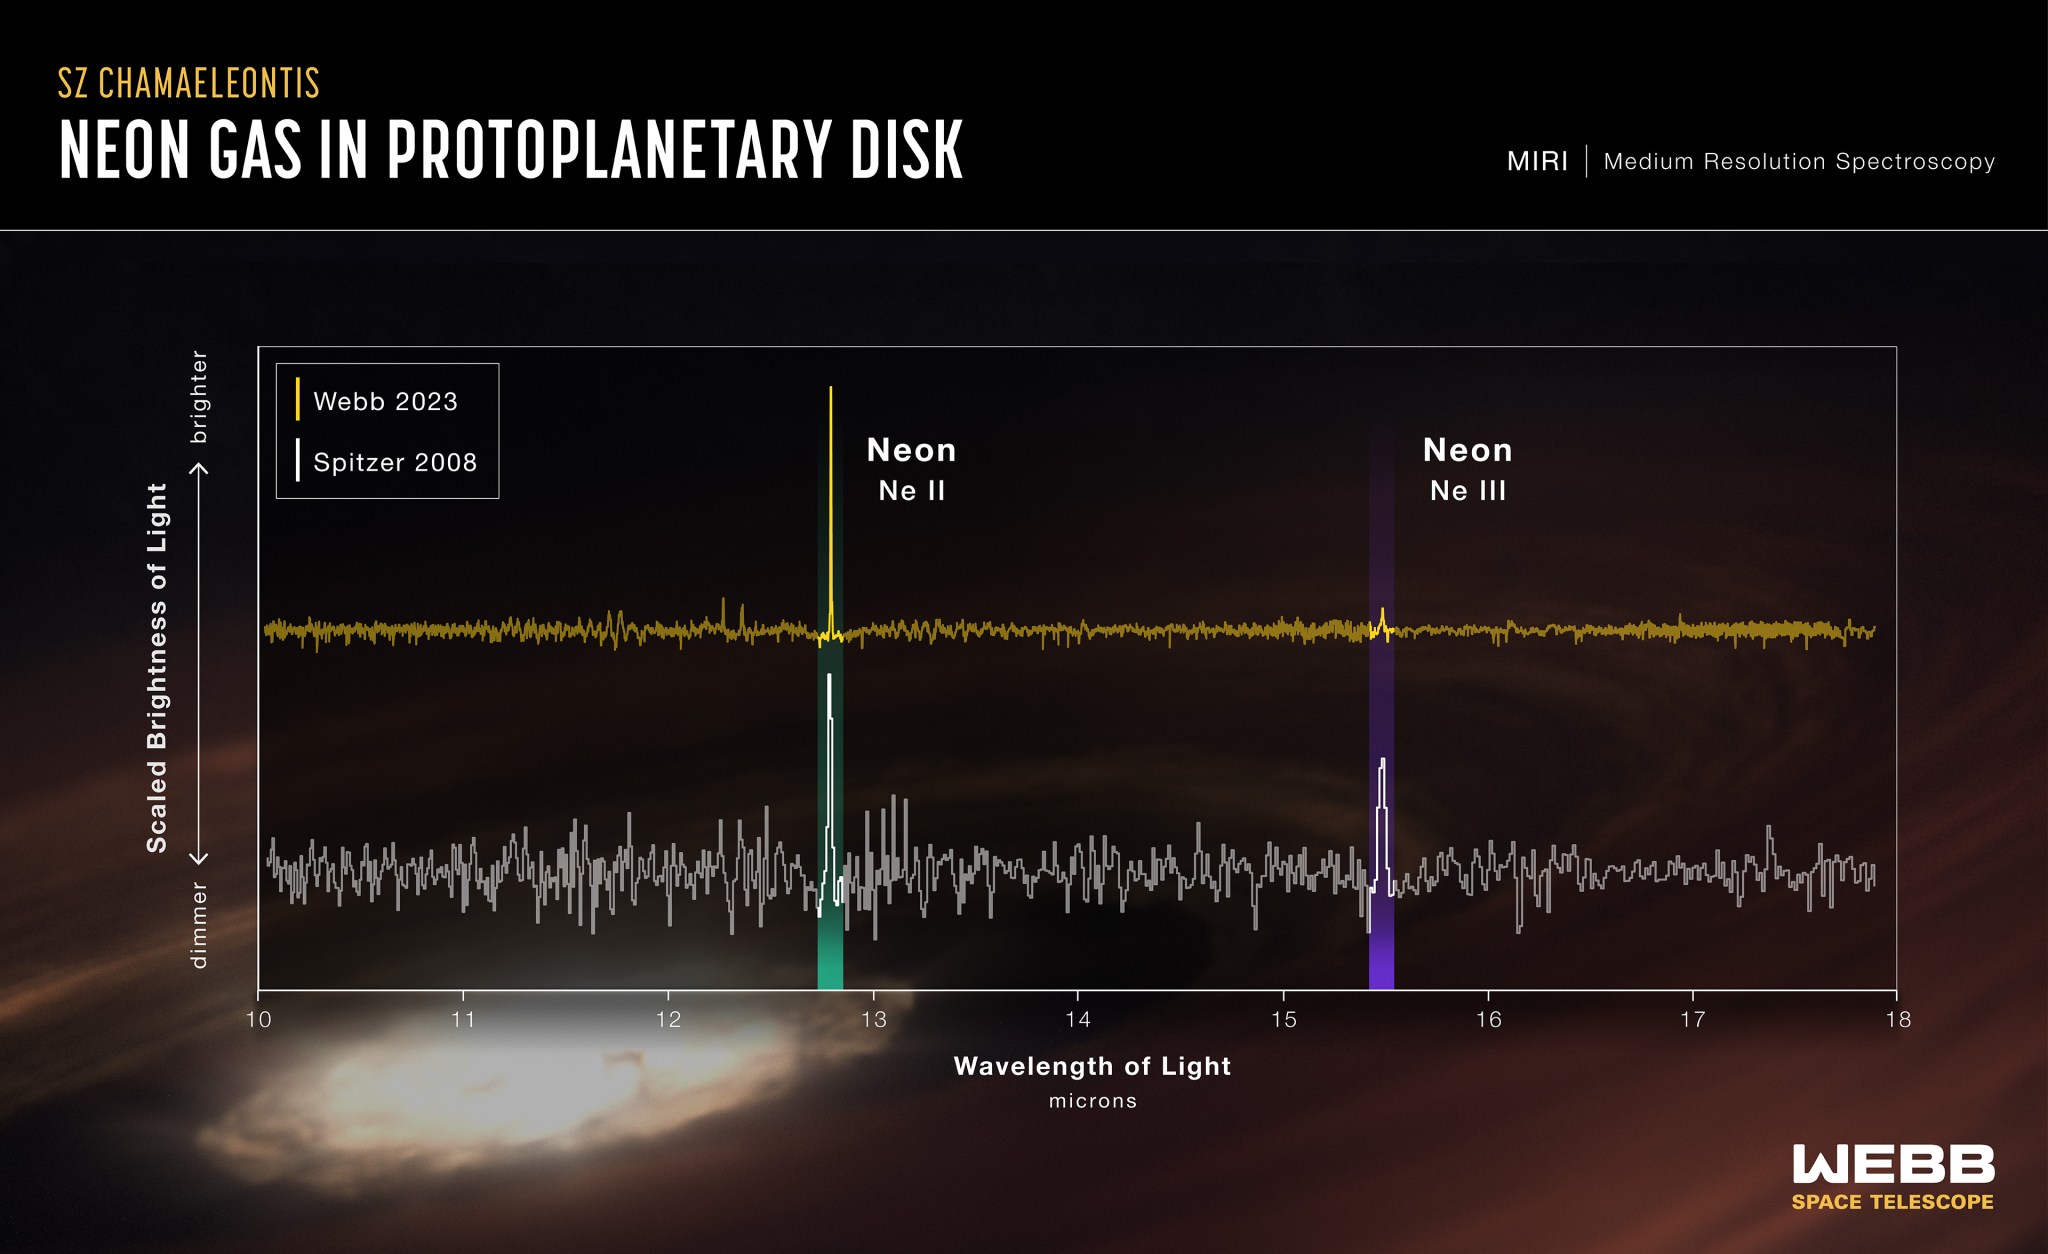 Infographic titled SZ Chamaeleontis, Neon Gas in Protoplanetary Disk. Text at top right reads MIRI, Medium Resolution Spectroscopy. Two spectra lines are compared, labeled in a key as yellow being Webb 2023, and white being Spitzer 2008. Behind the spectra an illustration of a protoplanetary disk shows through, with a very bright center. Two squiggly lines are compared, with yellow, the Webb data, shown on top of the Spitzer data. Just before 13 microns on the X axis, a green column highlights a tall vertical spike in both spectra. They are labeled Neon, N E Roman numeral two. Between 15 and 16 microns, a purple column highlights a shorter vertical spike in the Spitzer spectrum, which is contrasted with a very small peak in the Webb spectrum. This purple column, and the peaks it highlights, are labeled Neon, N E Roman numeral three. See extended description for more.